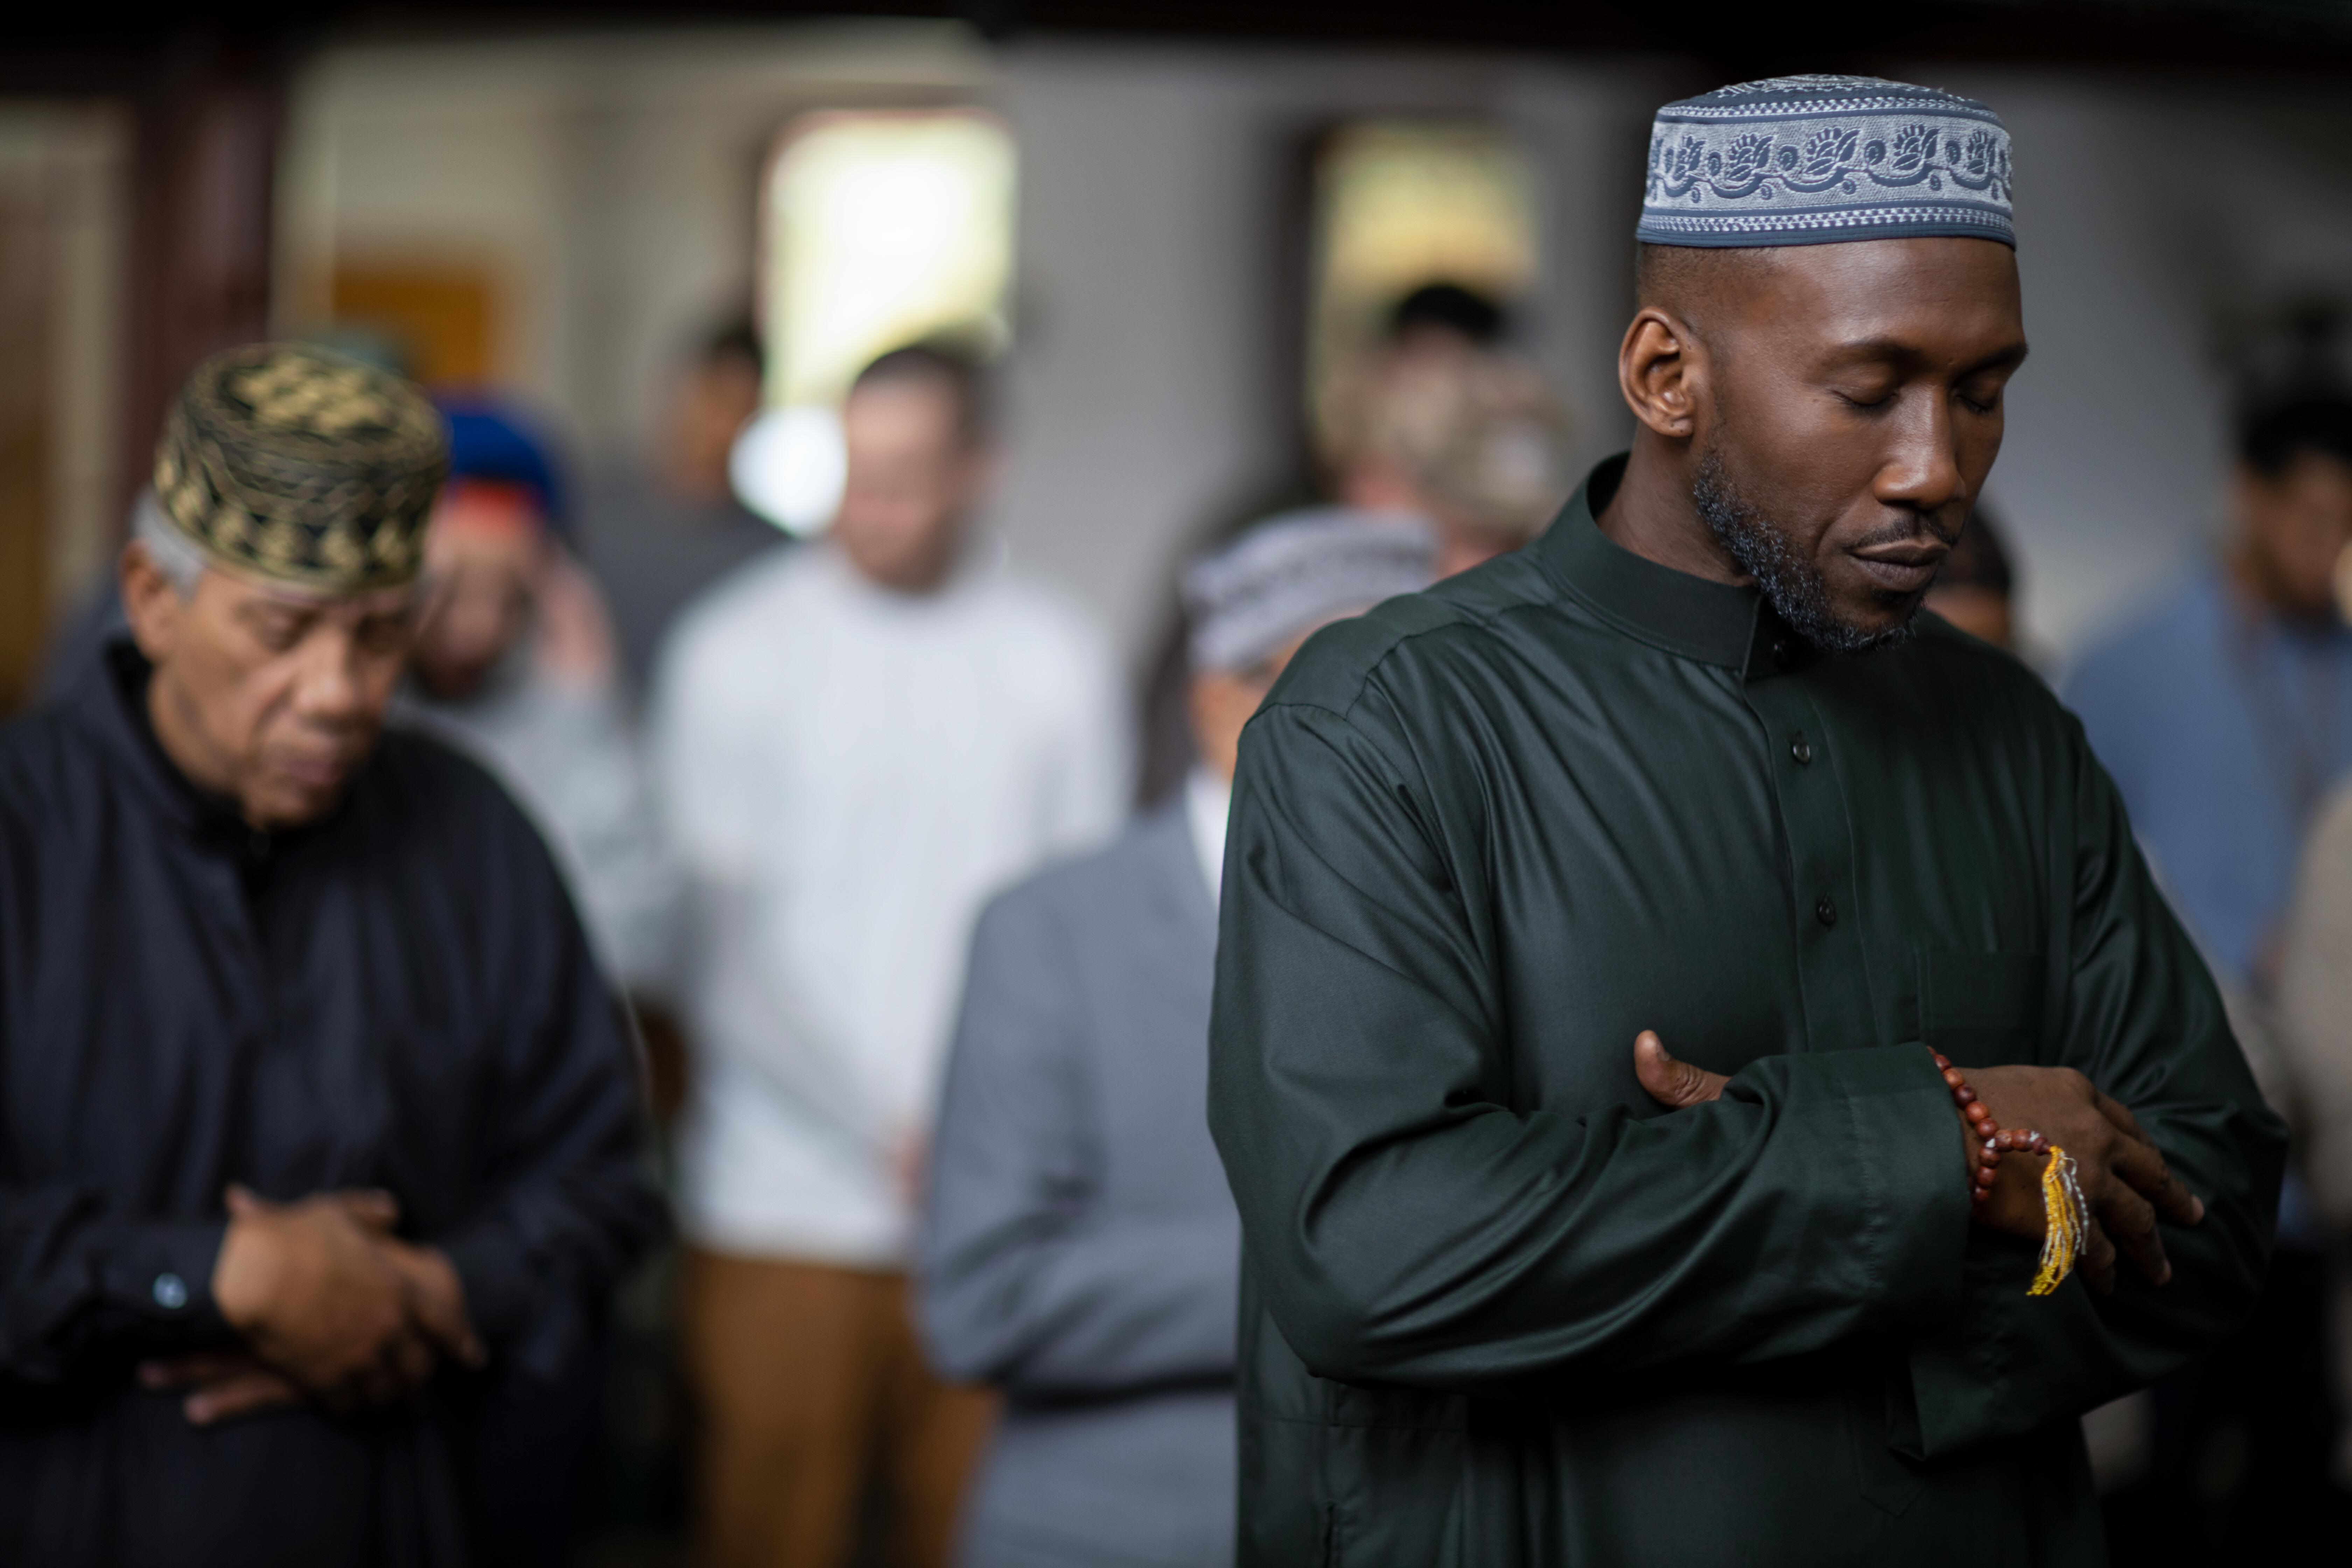 Mahershala Ali folds his hands and closes his eyes. Other Muslims stand behind him.